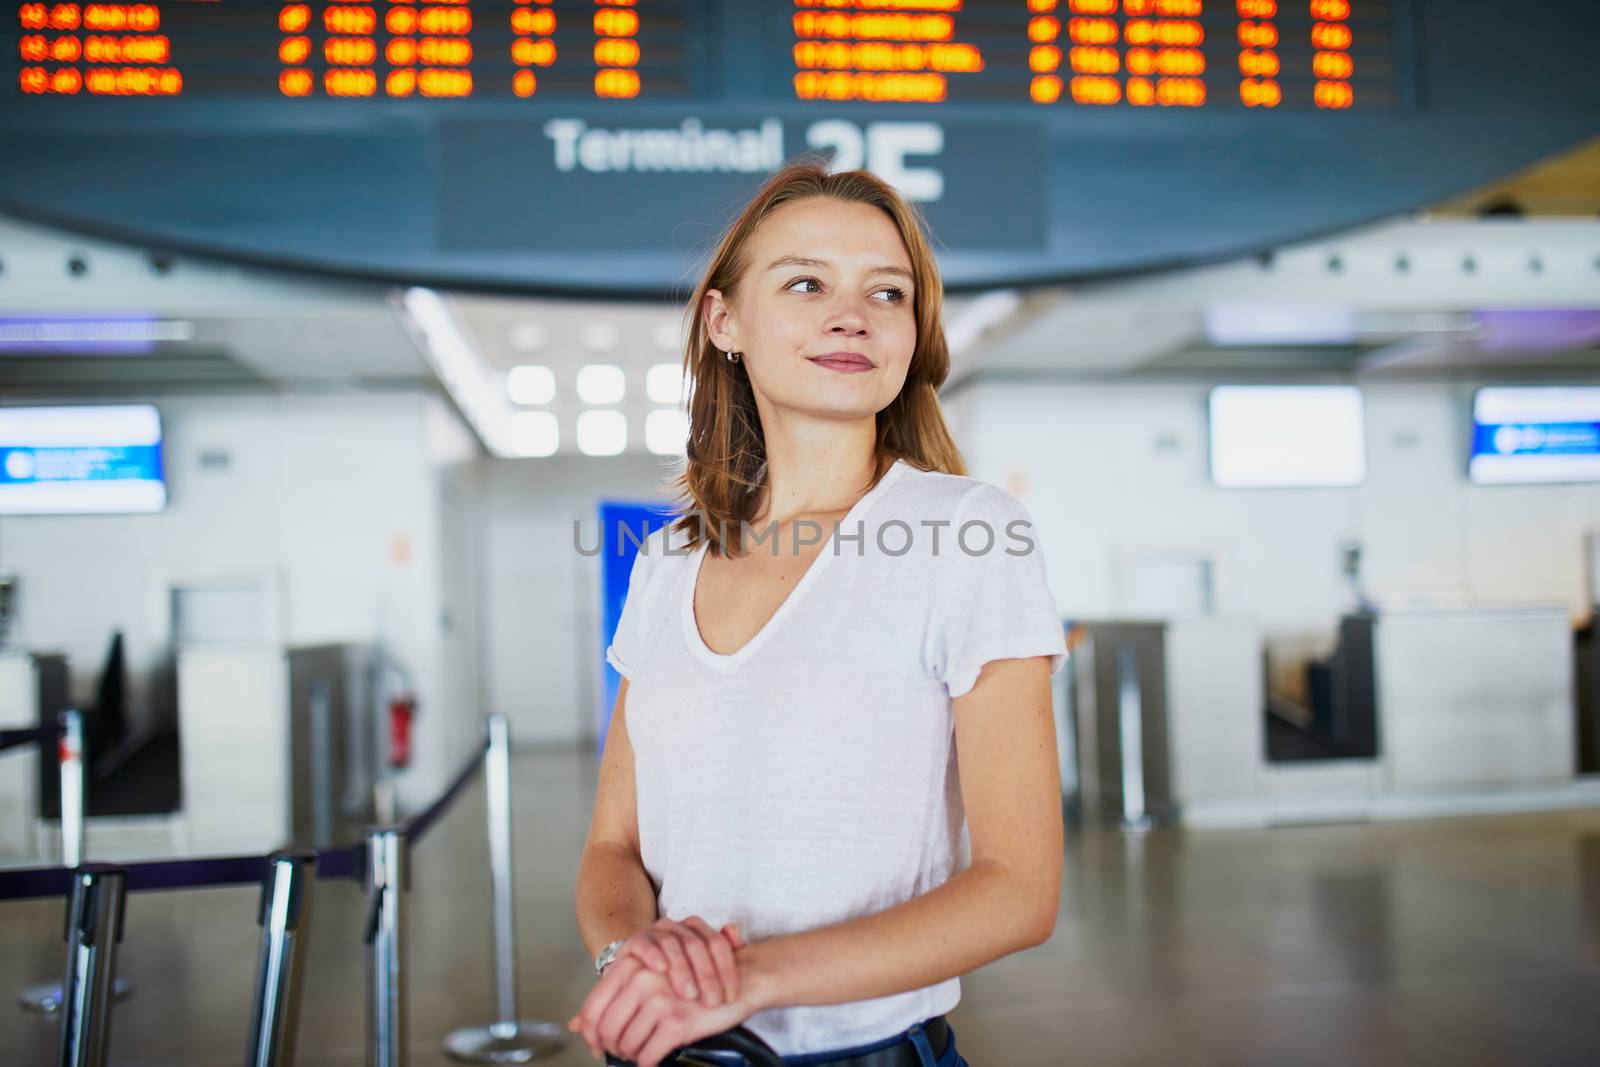 Young woman in international airport with luggage near information board waiting for her flight